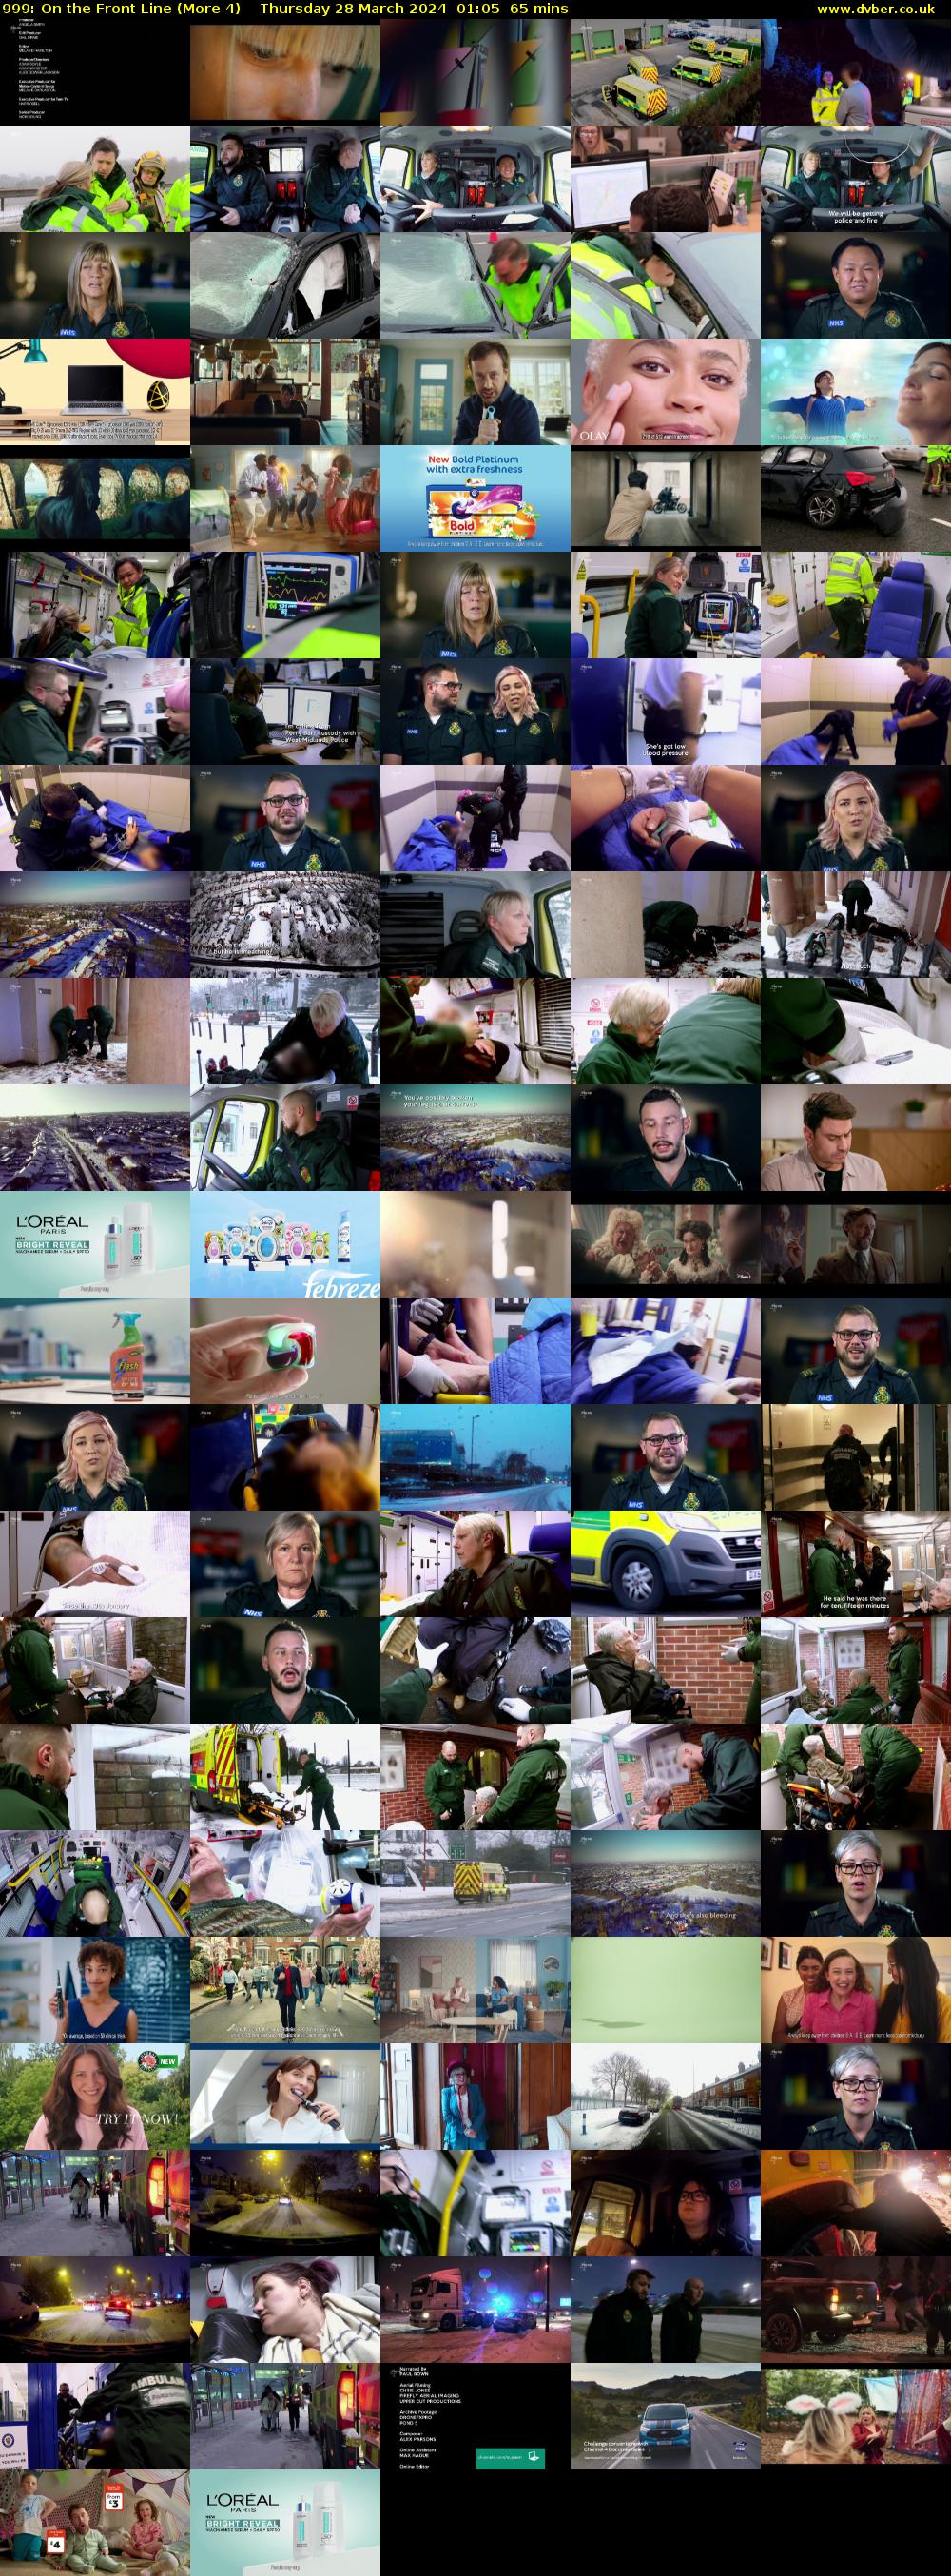 999: On the Front Line (More 4) Thursday 28 March 2024 01:05 - 02:10